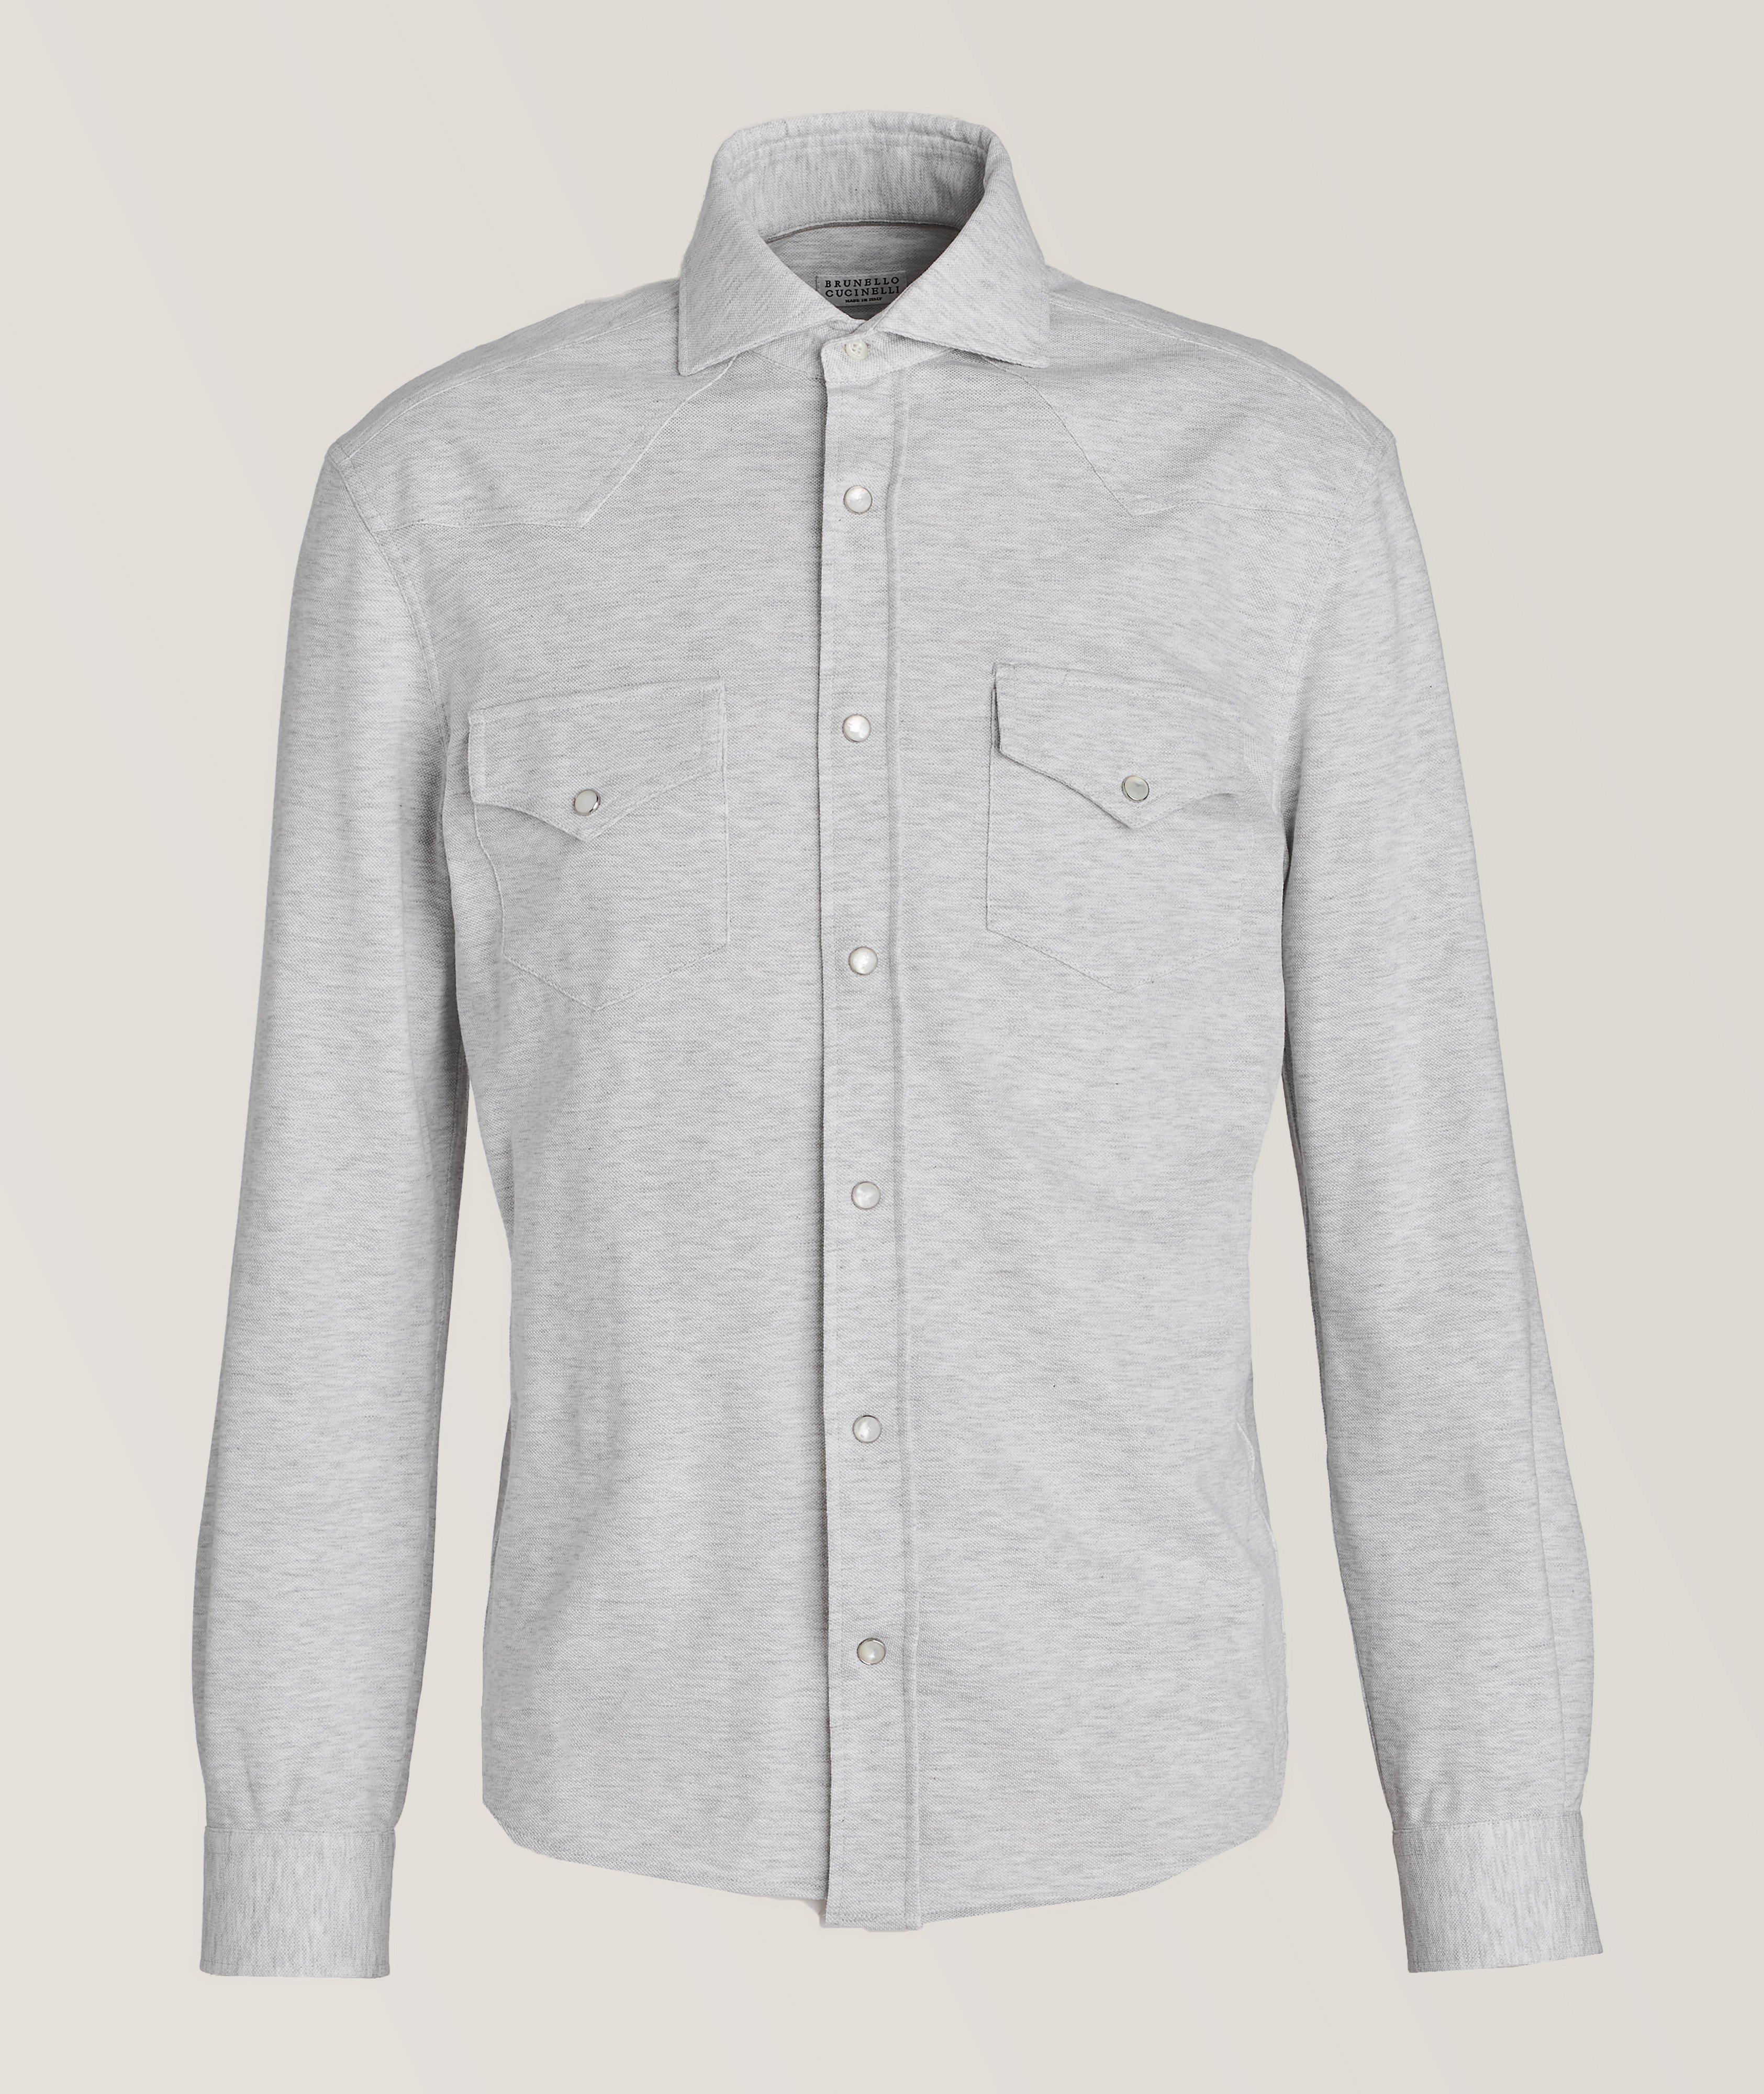 Western Cotton Leisure Fit Overshirt